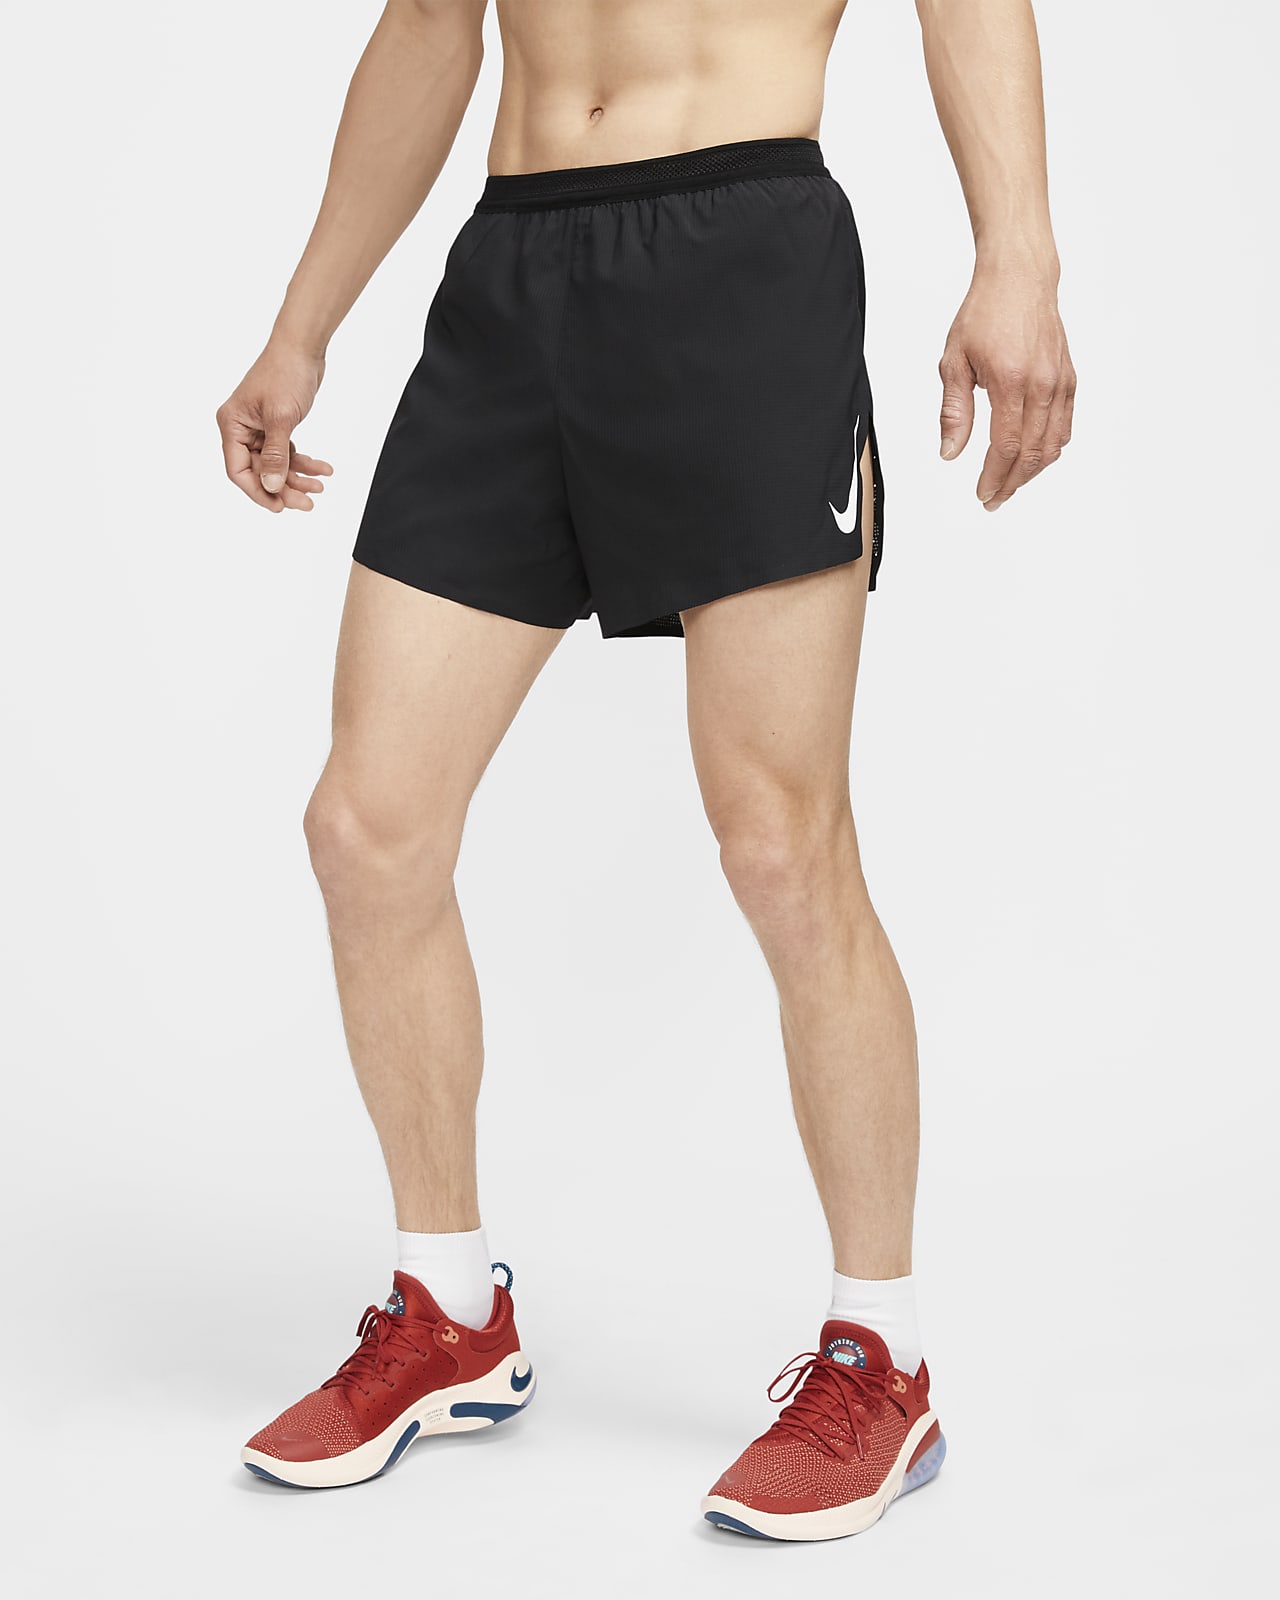 beven Mexico In de omgeving van Nike Dri-FIT ADV AeroSwift Men's 10cm (approx.) Brief-Lined Racing Shorts.  Nike BE